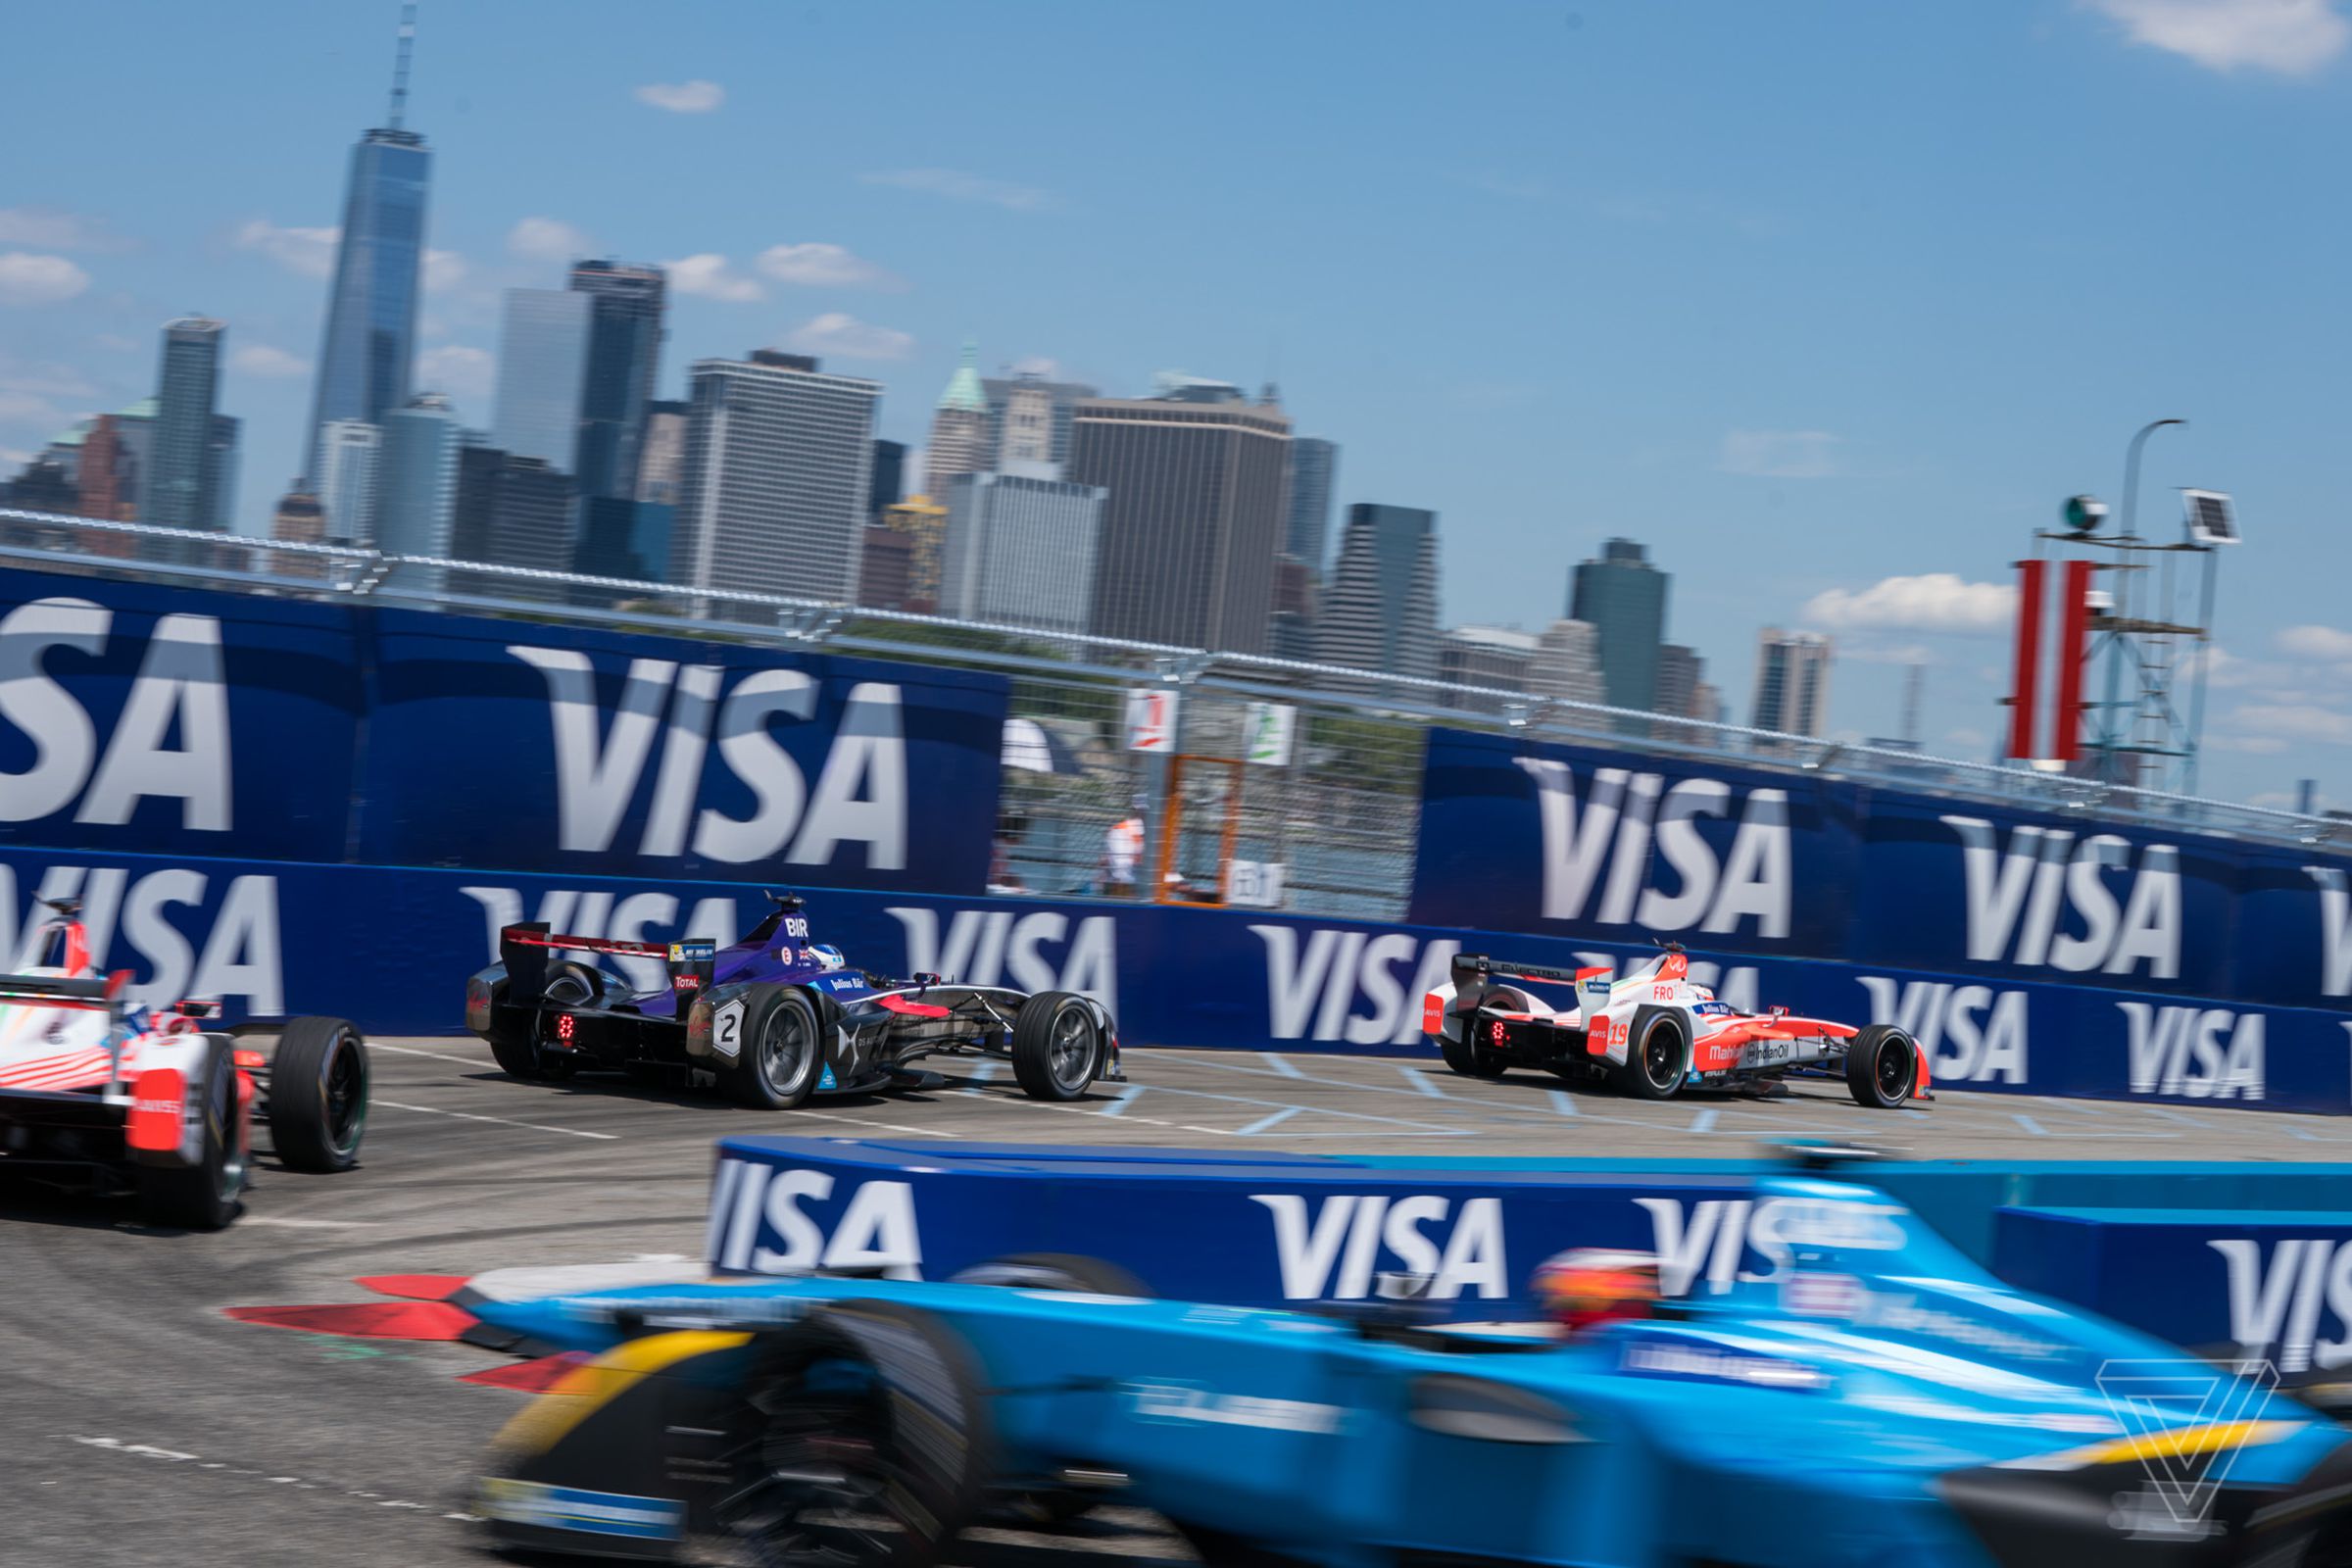 Formula E’s race in Brooklyn this summer went off without many complaints — but the course and grandstands were located entirely on private property.